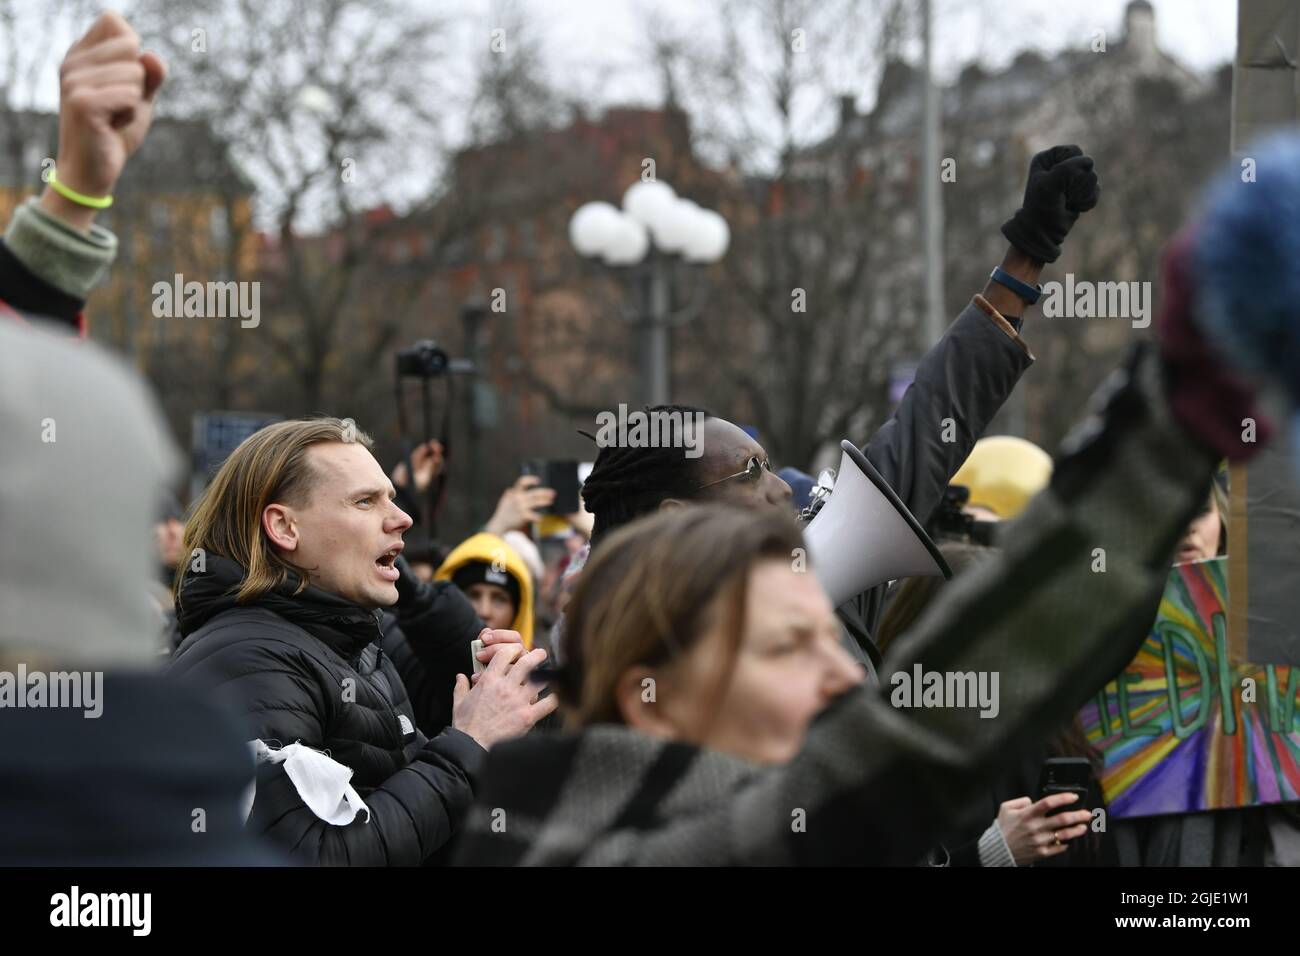 Hundreds of people gathered in central Stockholm, Sweden, on March 06, 2021, to protest against the coronavirus restrictions. The demonstration was dispersed by police as it was held without permission and the number of participants exceeded the limits for public gatherings under Sweden’s pandemic laws. Photo Henrik Montgomery / TT code 10060  Stock Photo